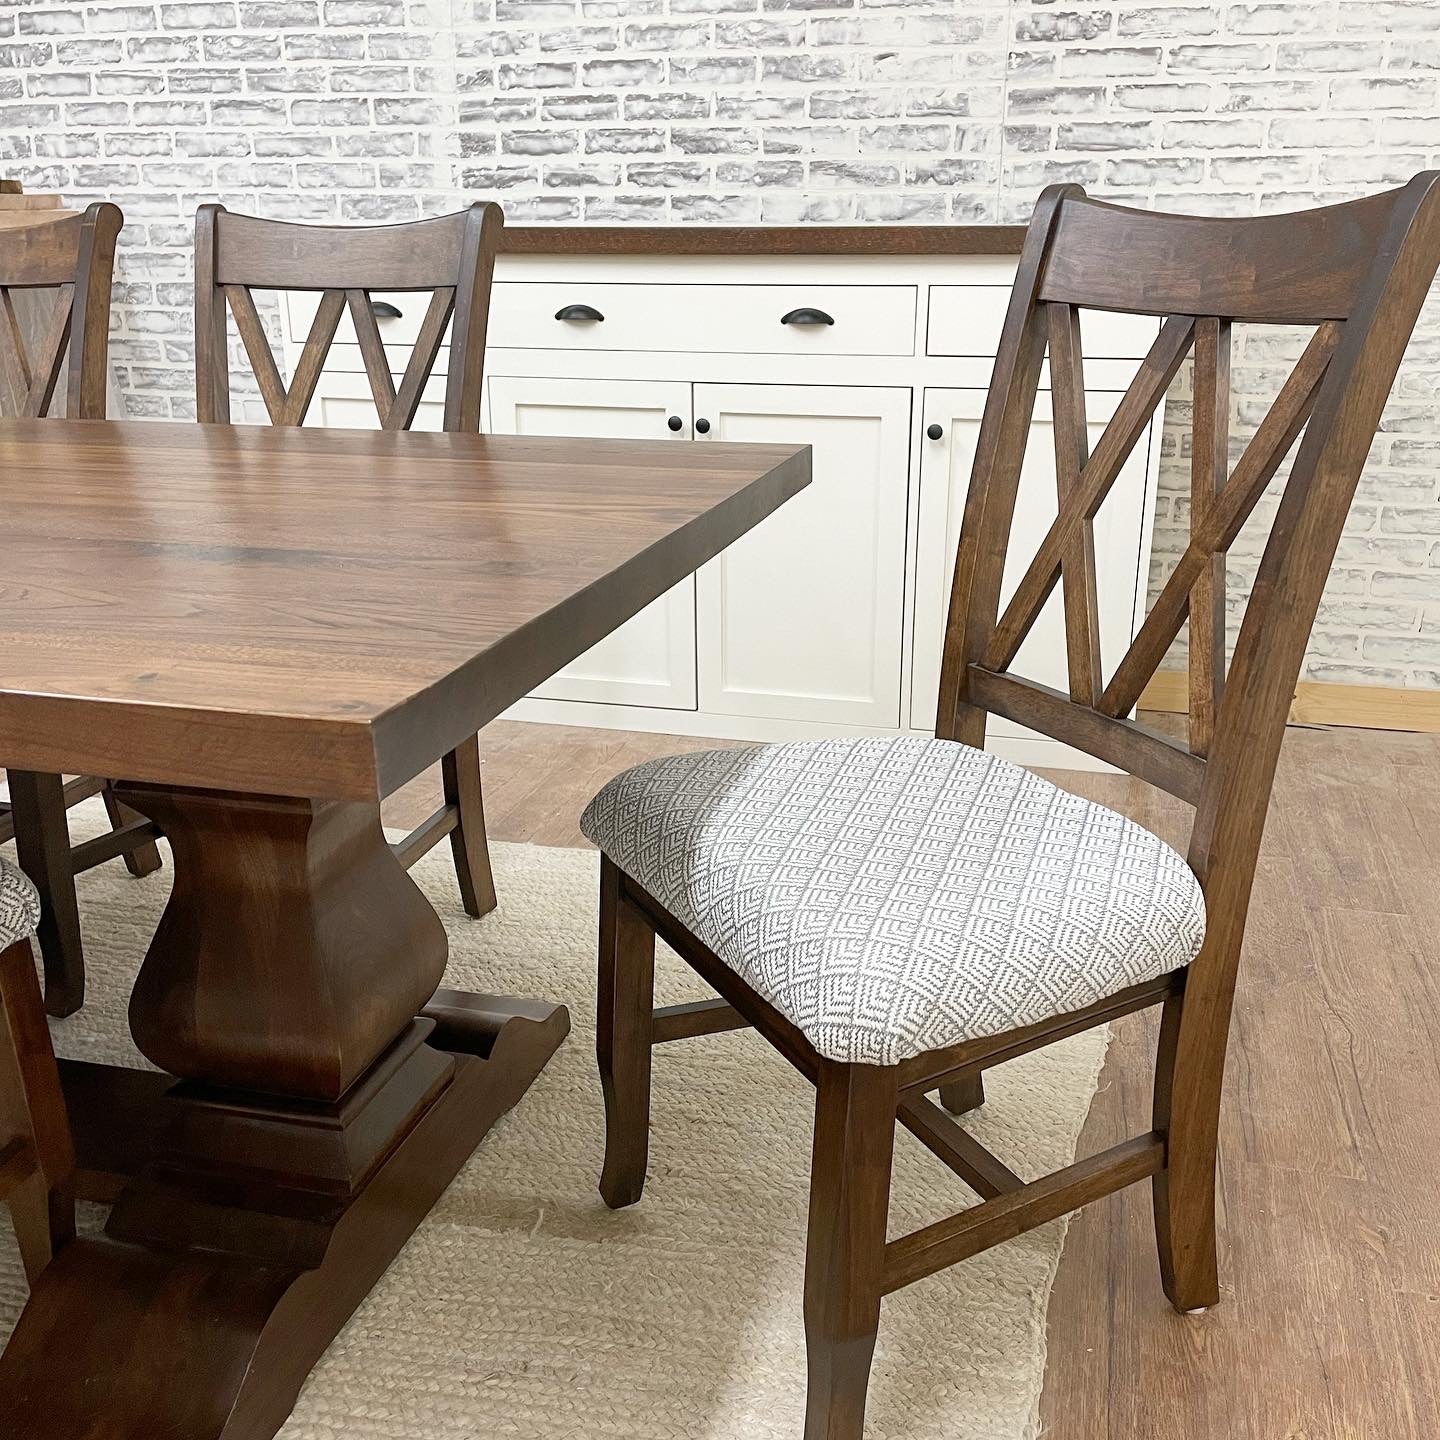 Pictured with a 7' L x 42" W Walnut dining table stained Honey. Pictured with Double Cross Back Chair with matching stain and upholstered seat with fabric provided by client.